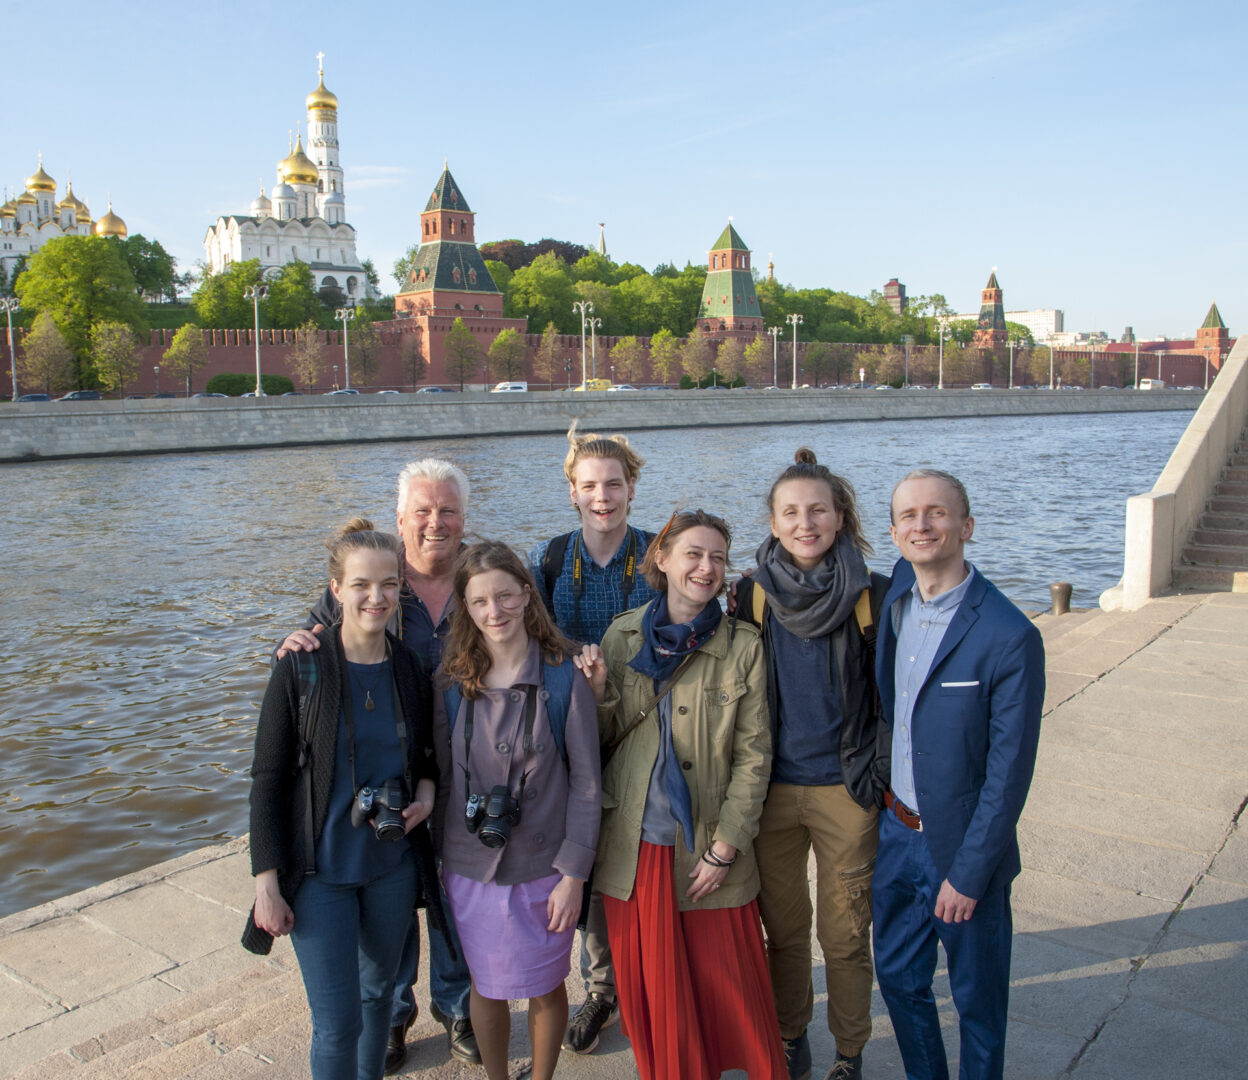 Our Moscow photographer group